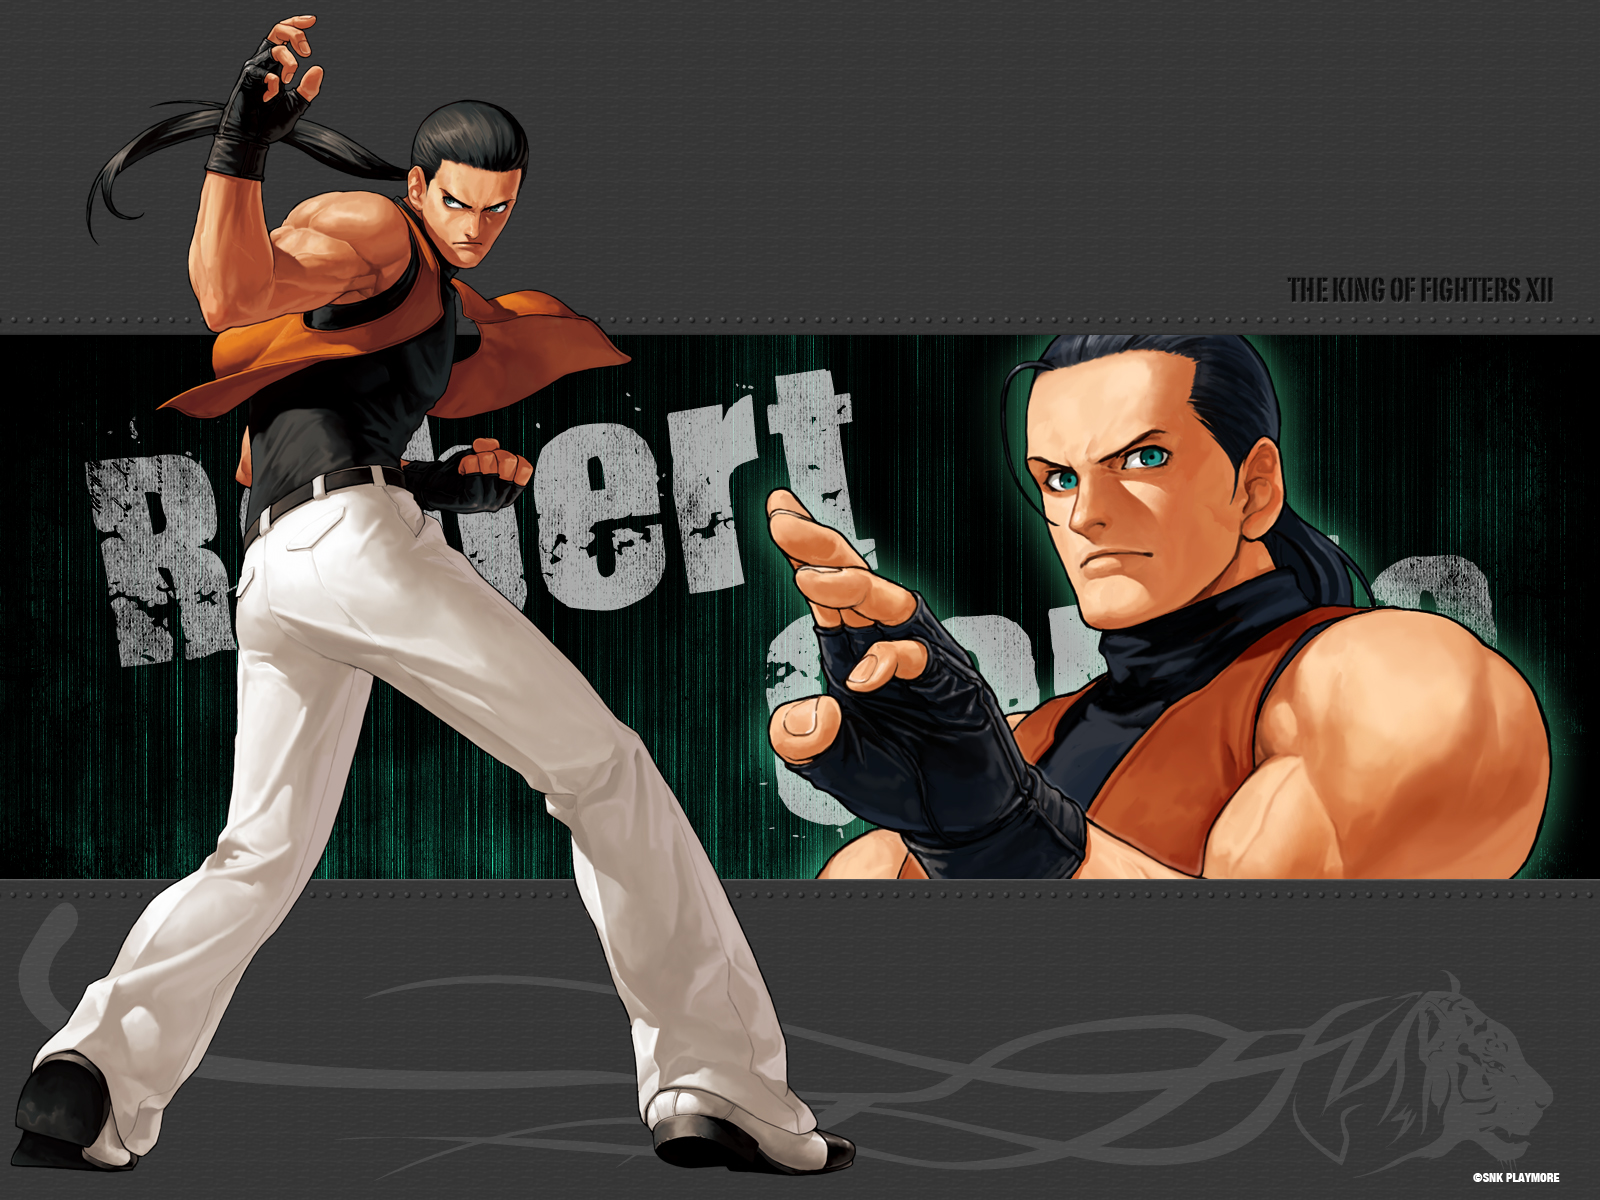 The King of Fighters XII Wallpapers 1600x1200   Photo 14 of 24 1600x1200